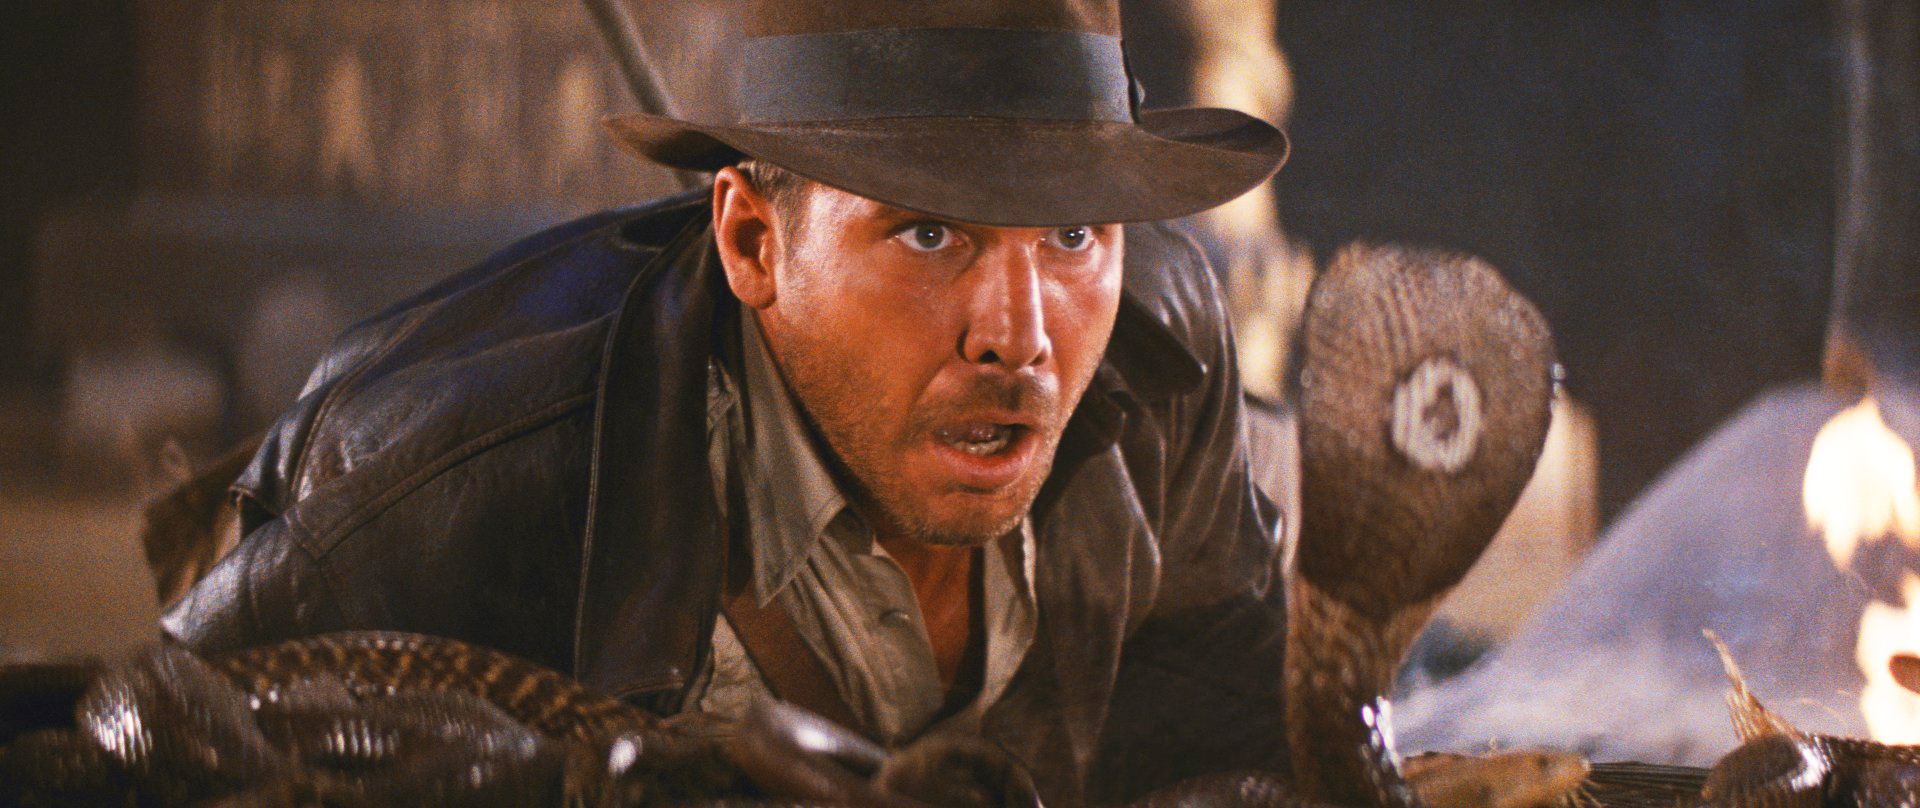 11 times Indiana Jones was actually kind of a douchebag